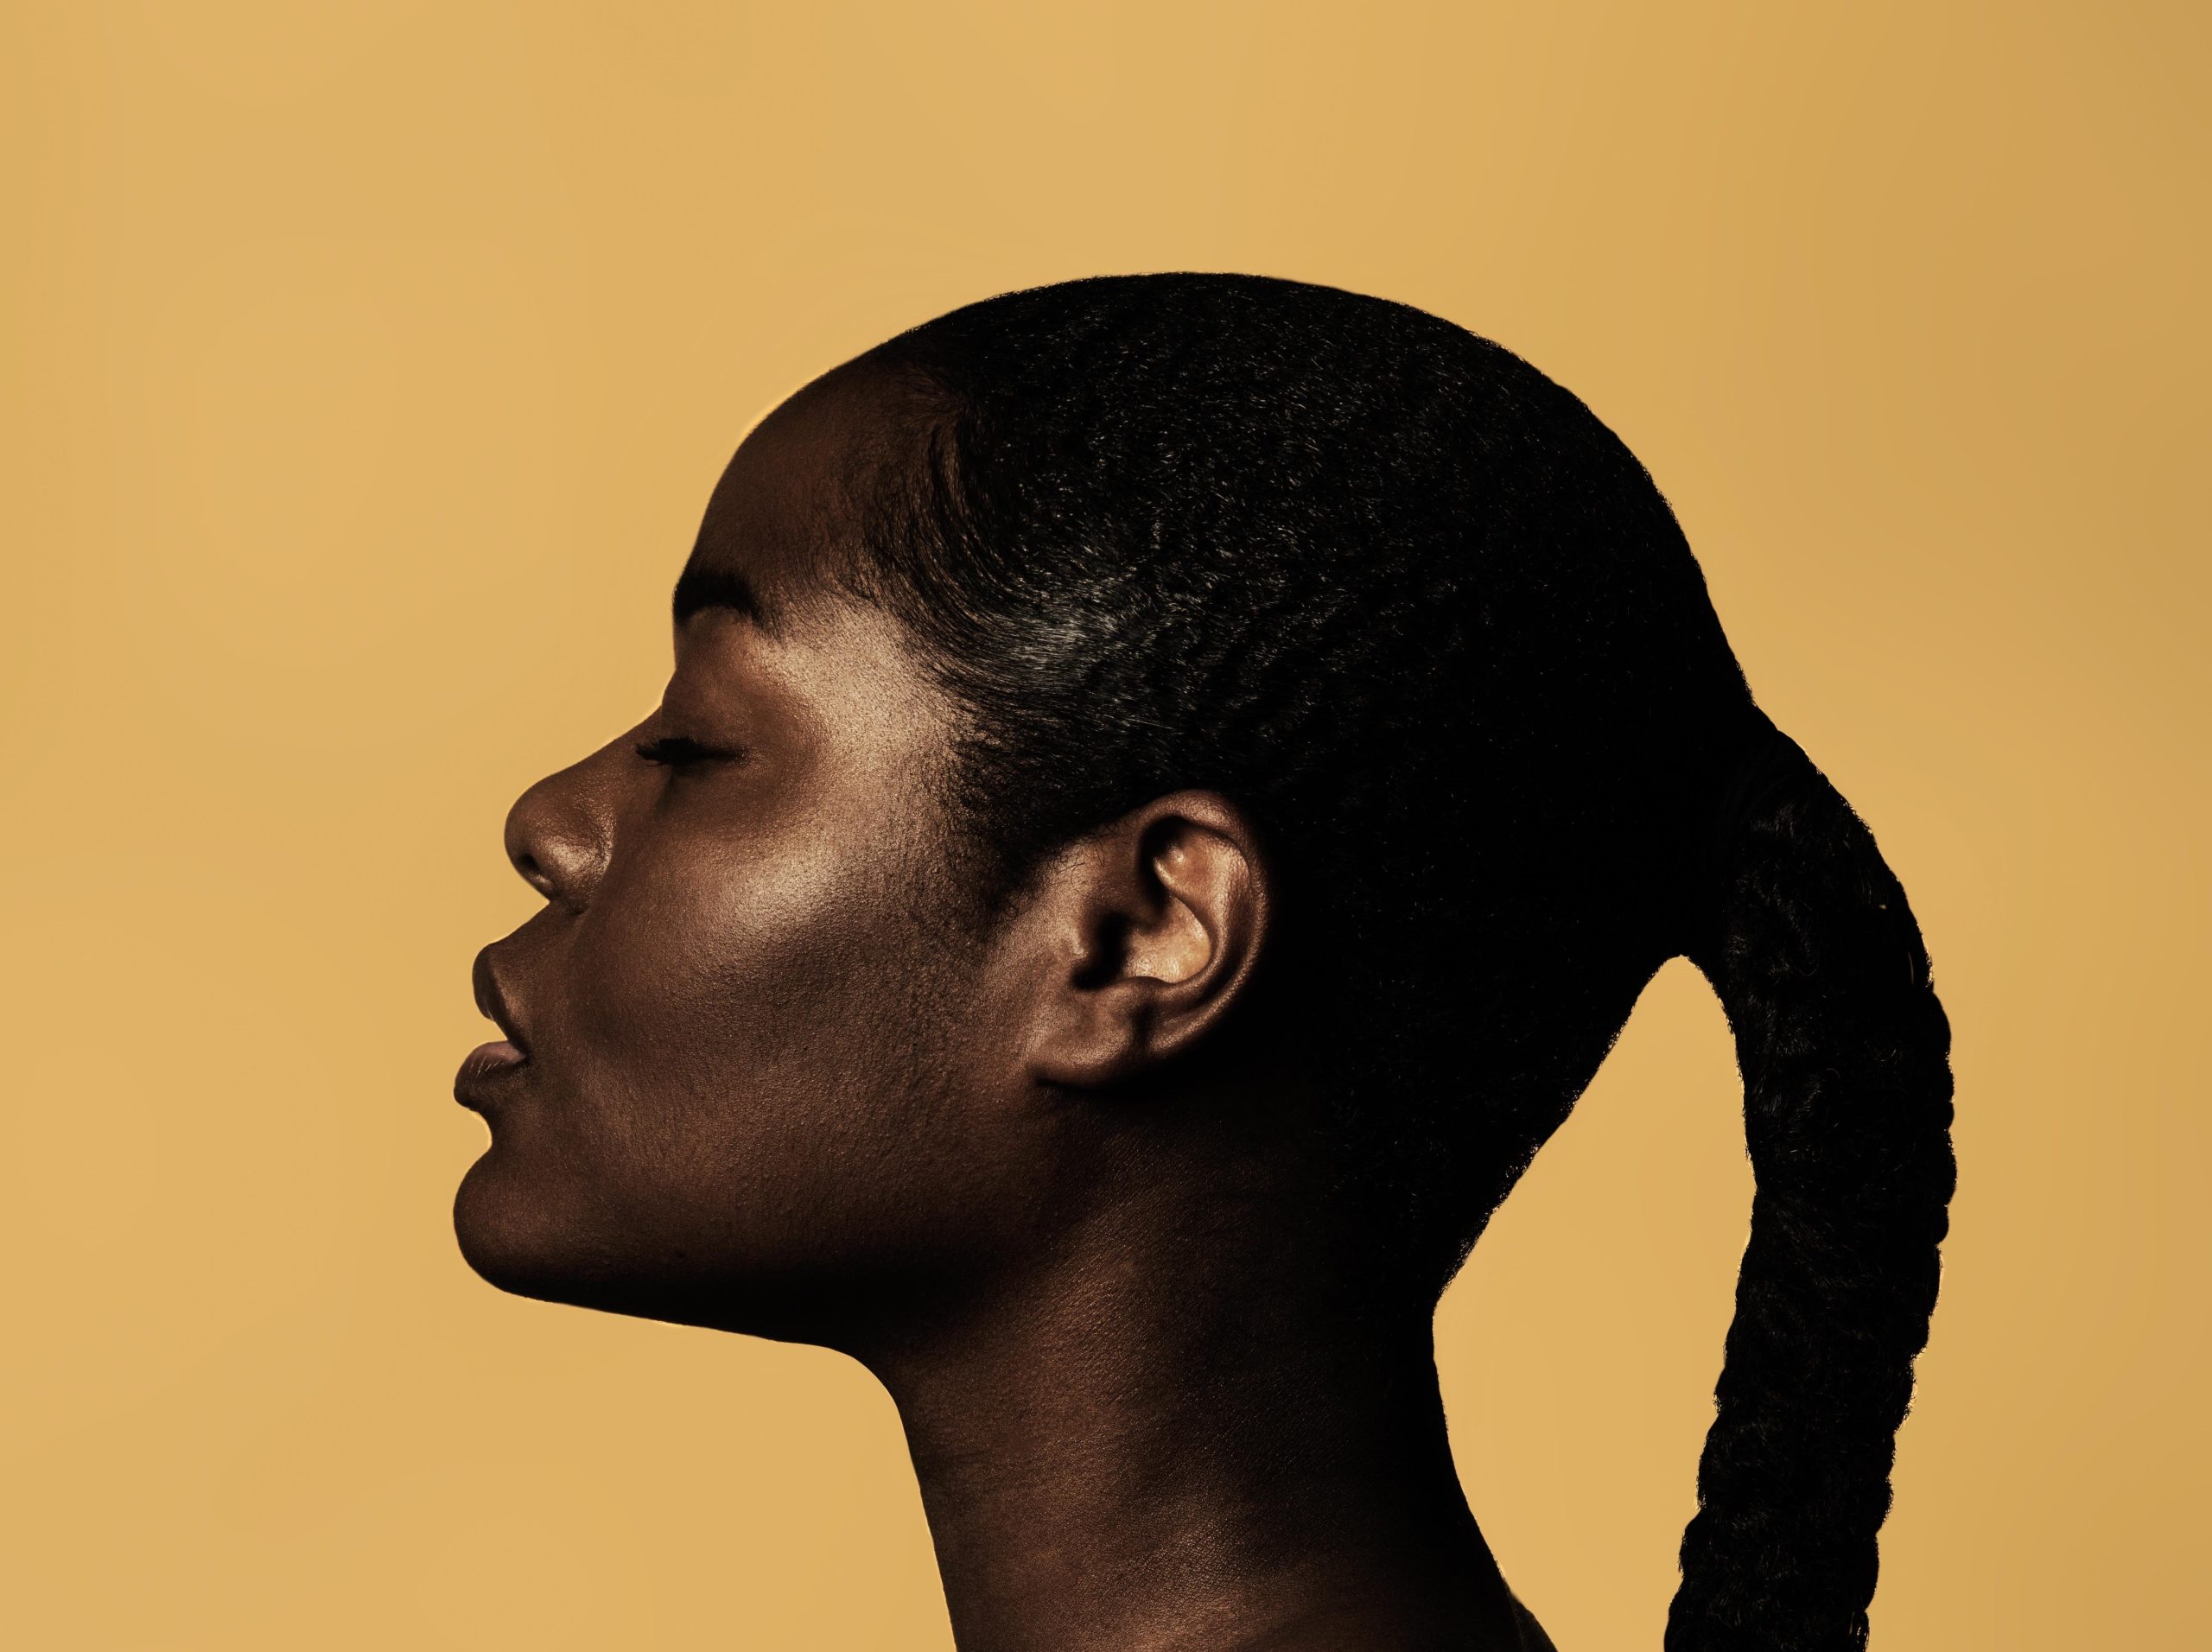 The profile of a black woman with a single braid against a yellow background.